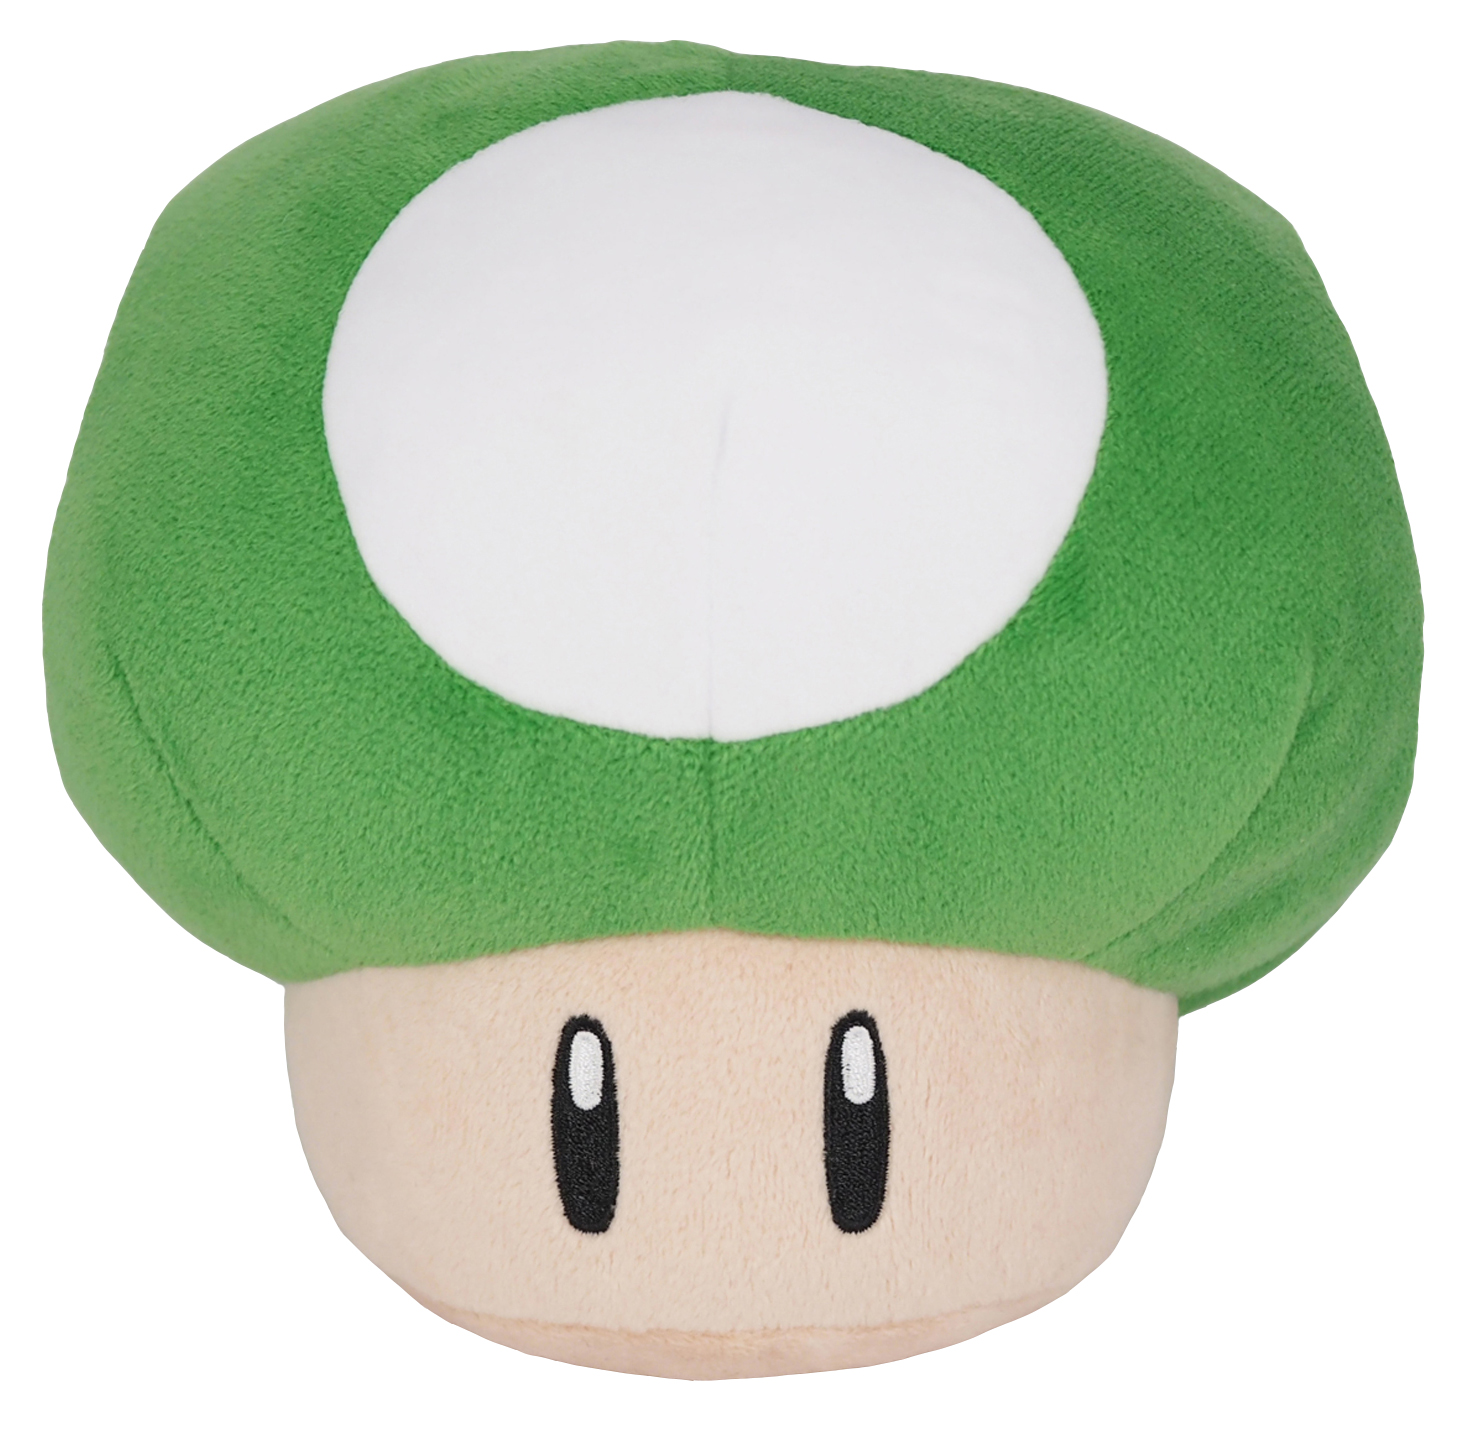 Is this toad plush official and what brand is it? : r/MarioPlush